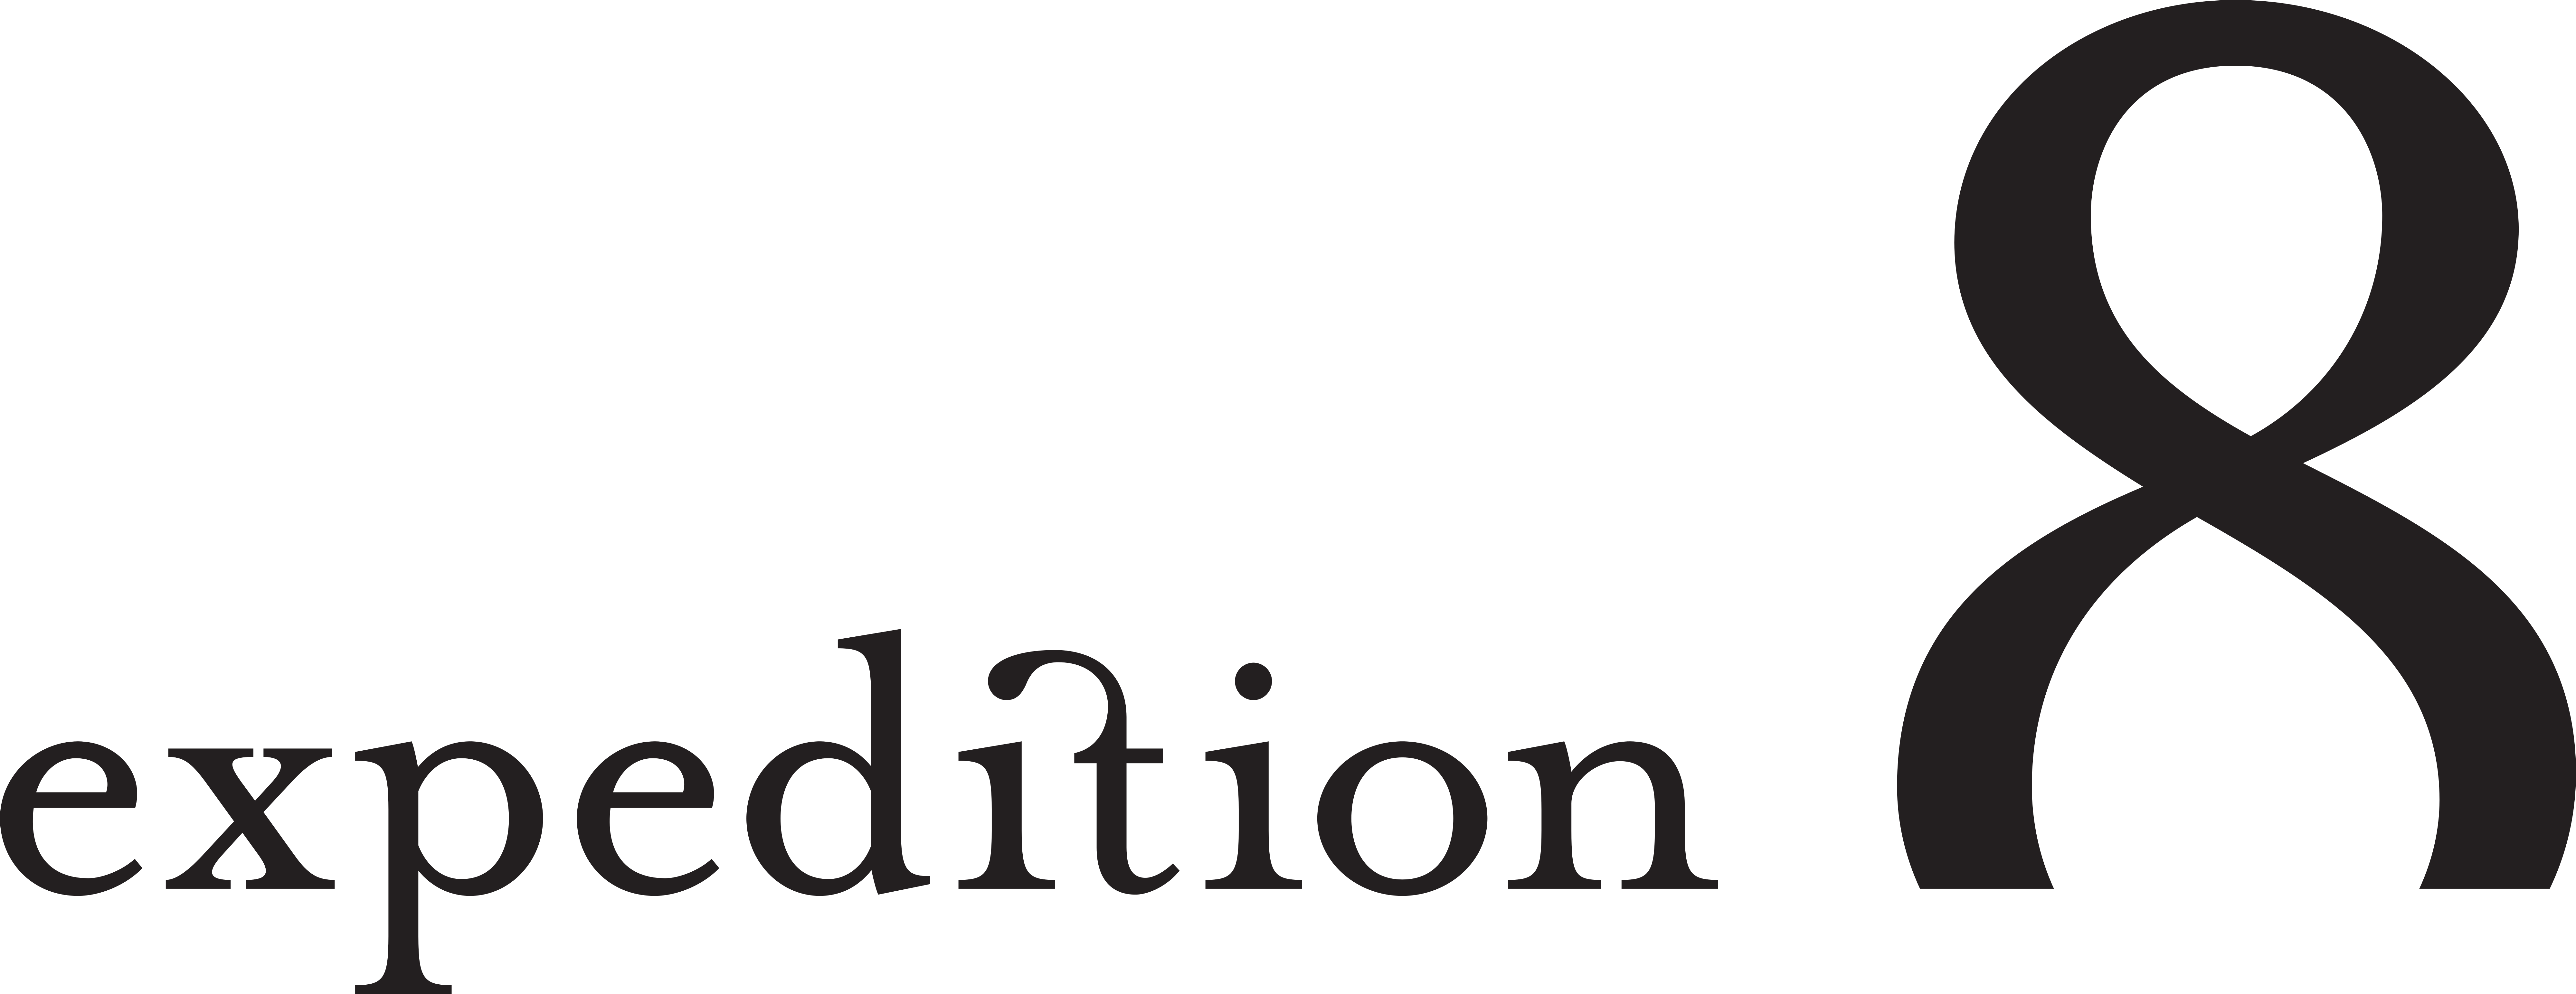 Expedition 8 logo